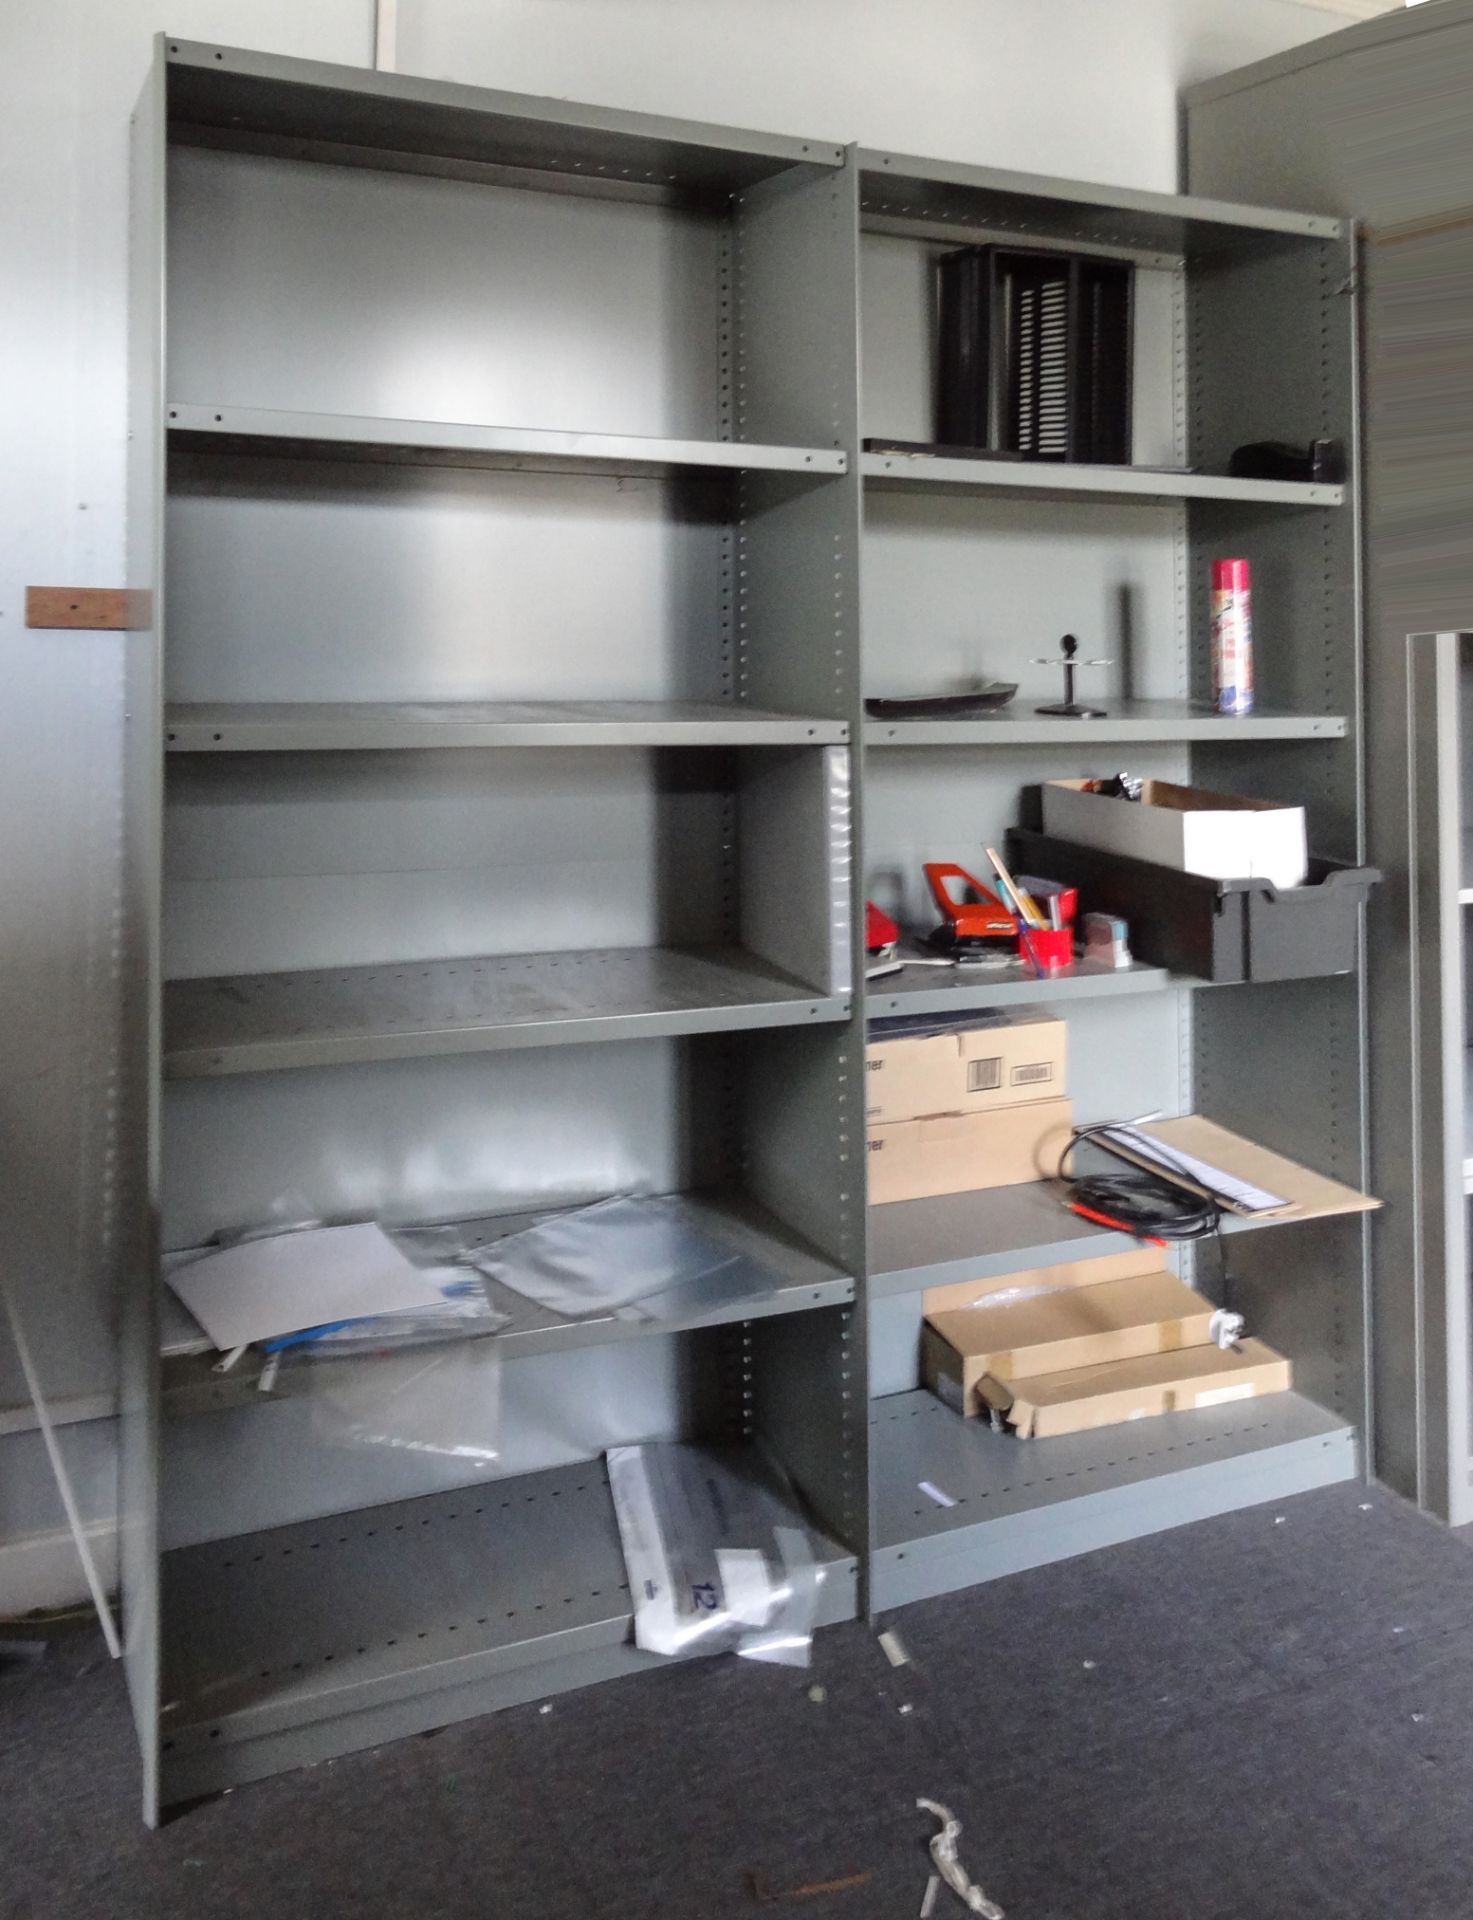 Four Bays Rolled Edge Steel Shelving, with 900mm x 300mm shelves